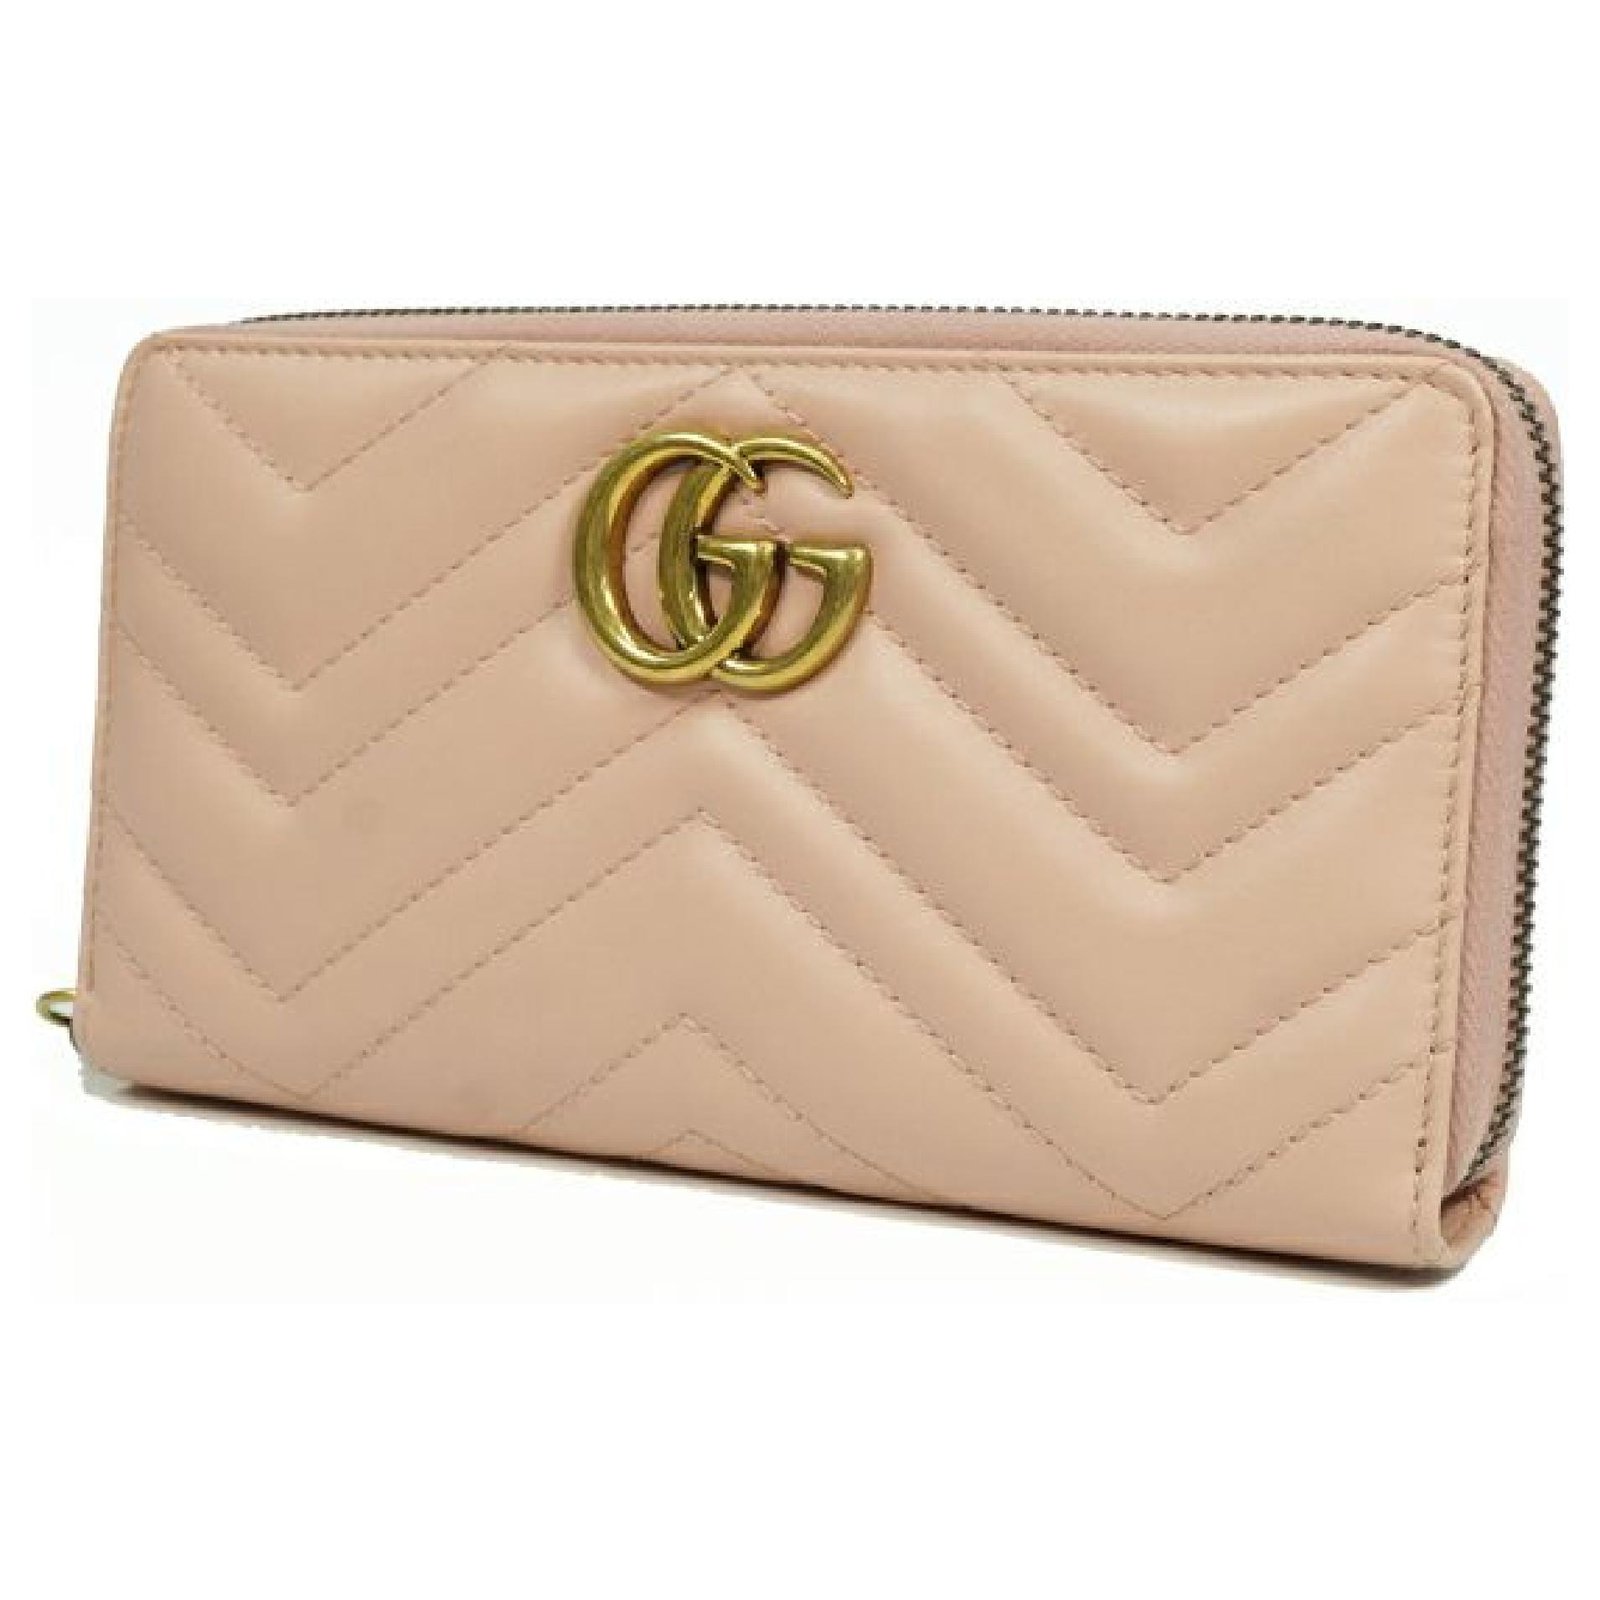 gucci marmont pink wallet